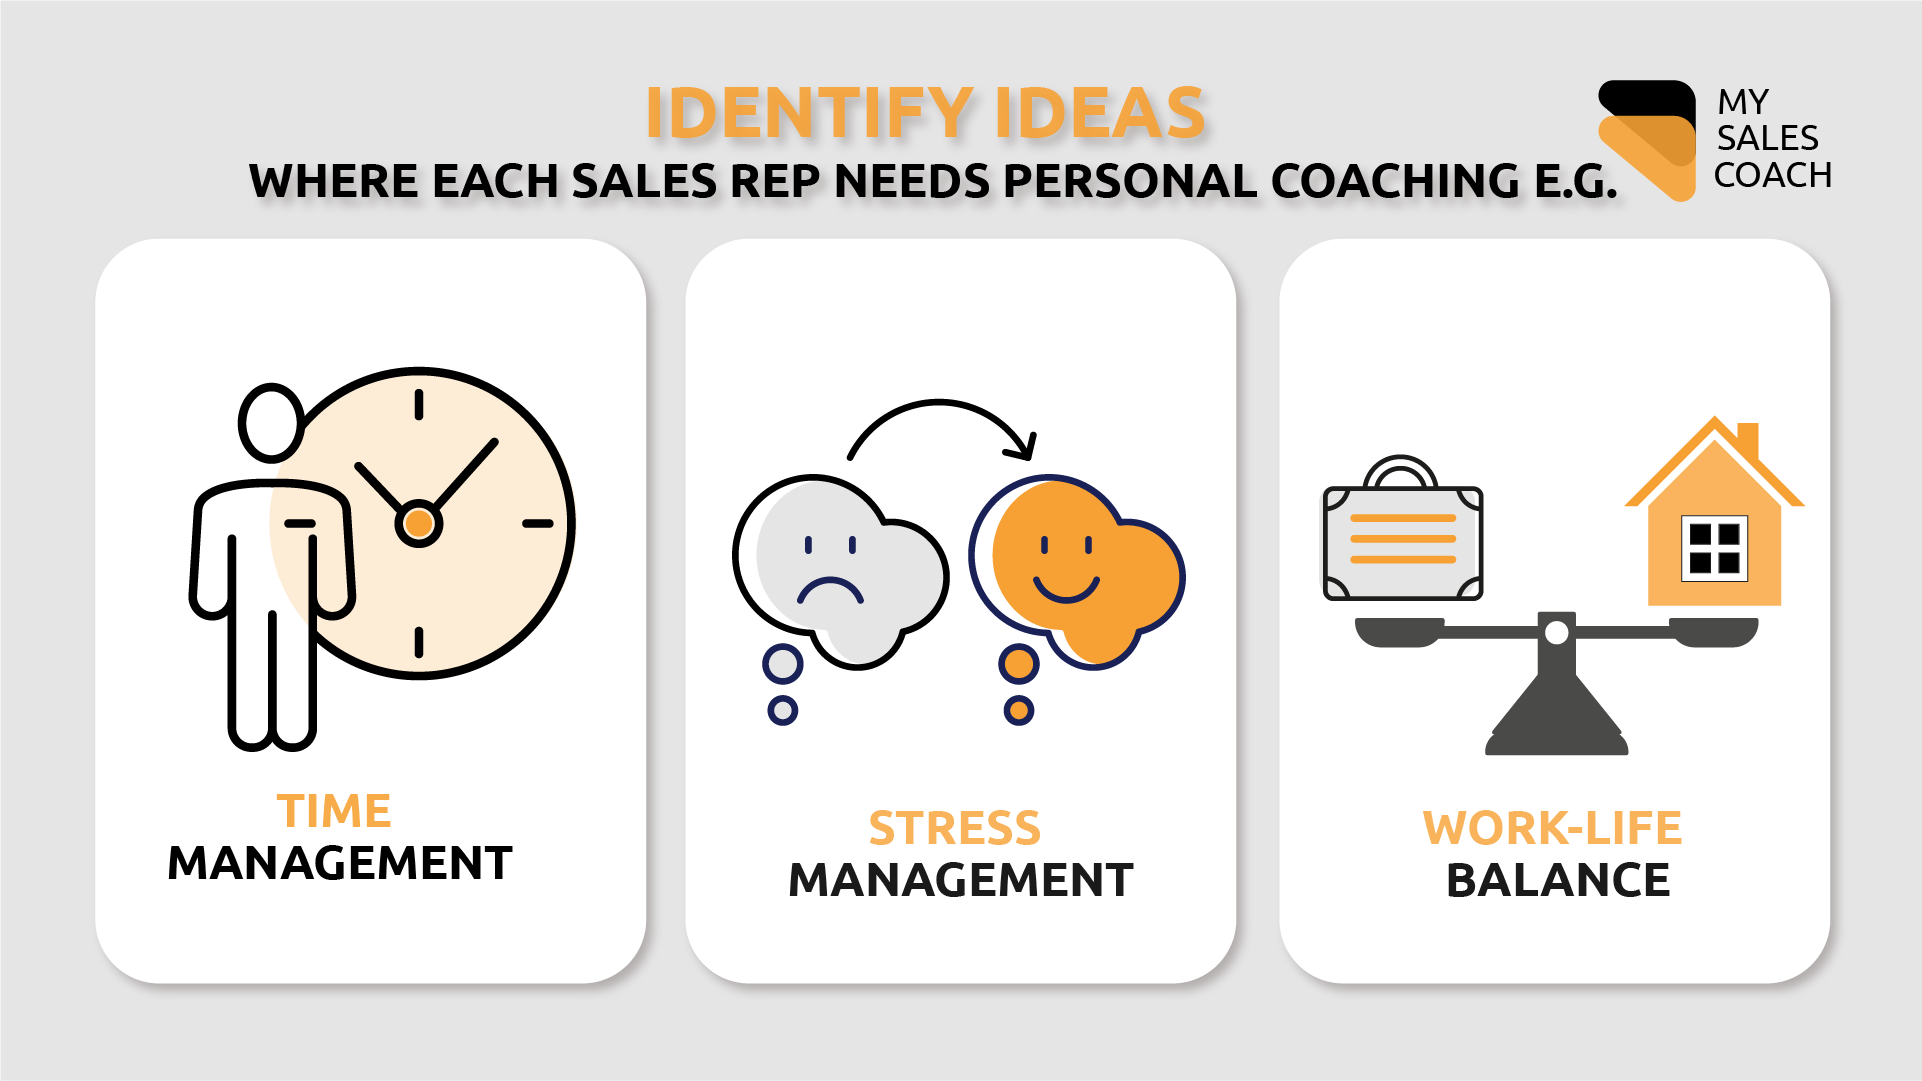 areas where each sales rep needs personal coaching